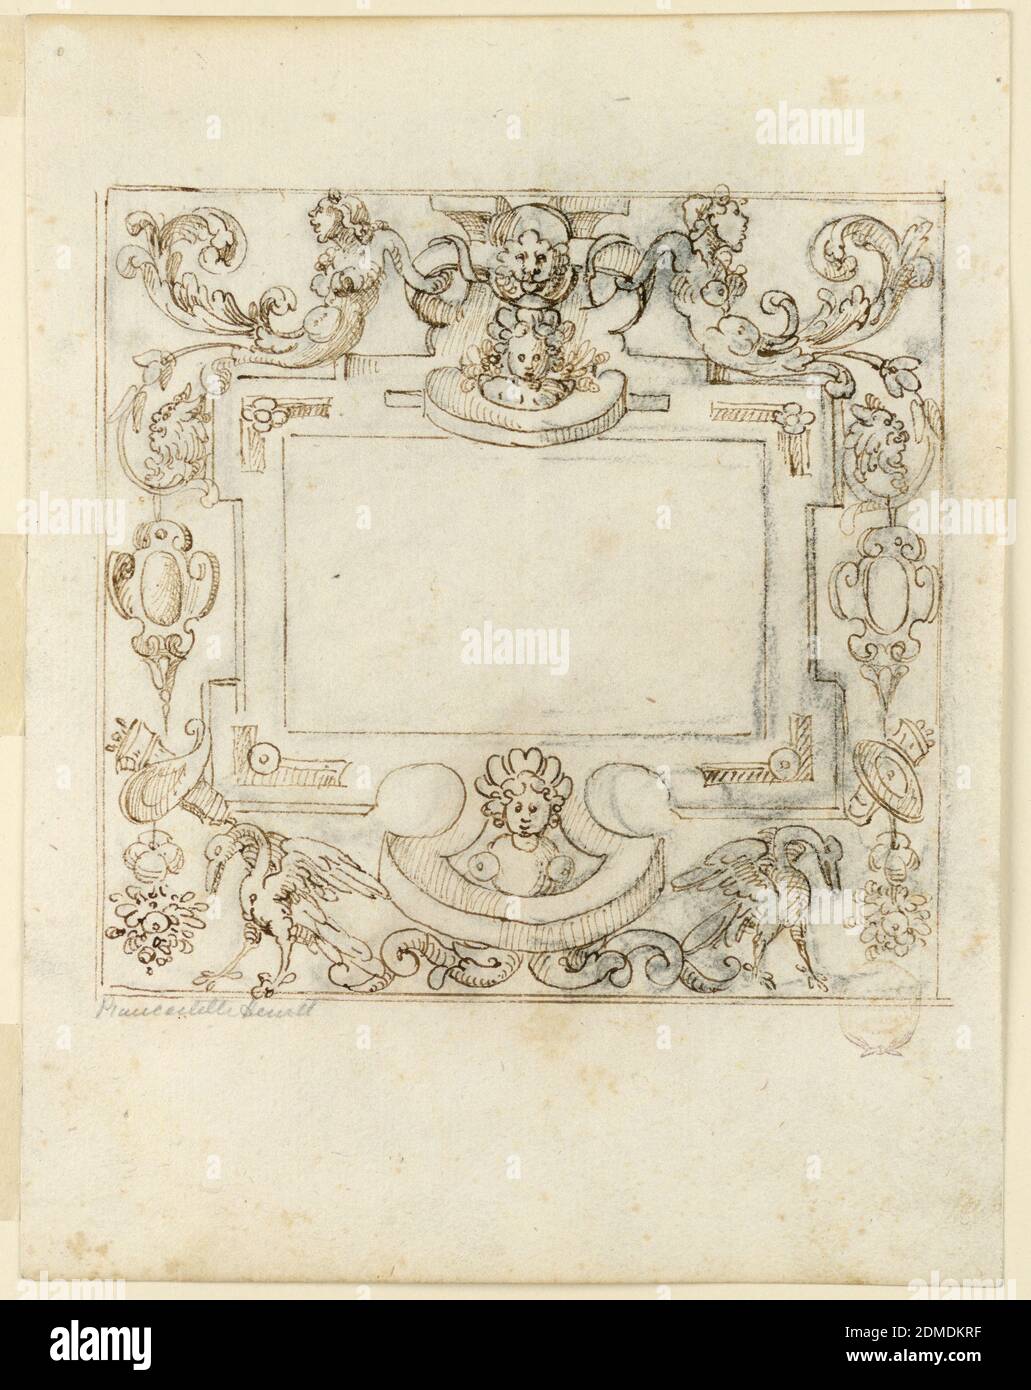 Decorative Frame; verso: Frieze with Pageant, Charcoal, pen and ink on paper, Frame with grotesque decoration. At top center, child and lion masks flanked by half figures of armless mermaids with acanthus tails. Below, escutcheons, trophies, and birds. Blank central panel. Double framing lines. Verso: A figure seated below a canopy in a wagon drawn by cows., Italy, early 17th century, ornament, Drawing Stock Photo